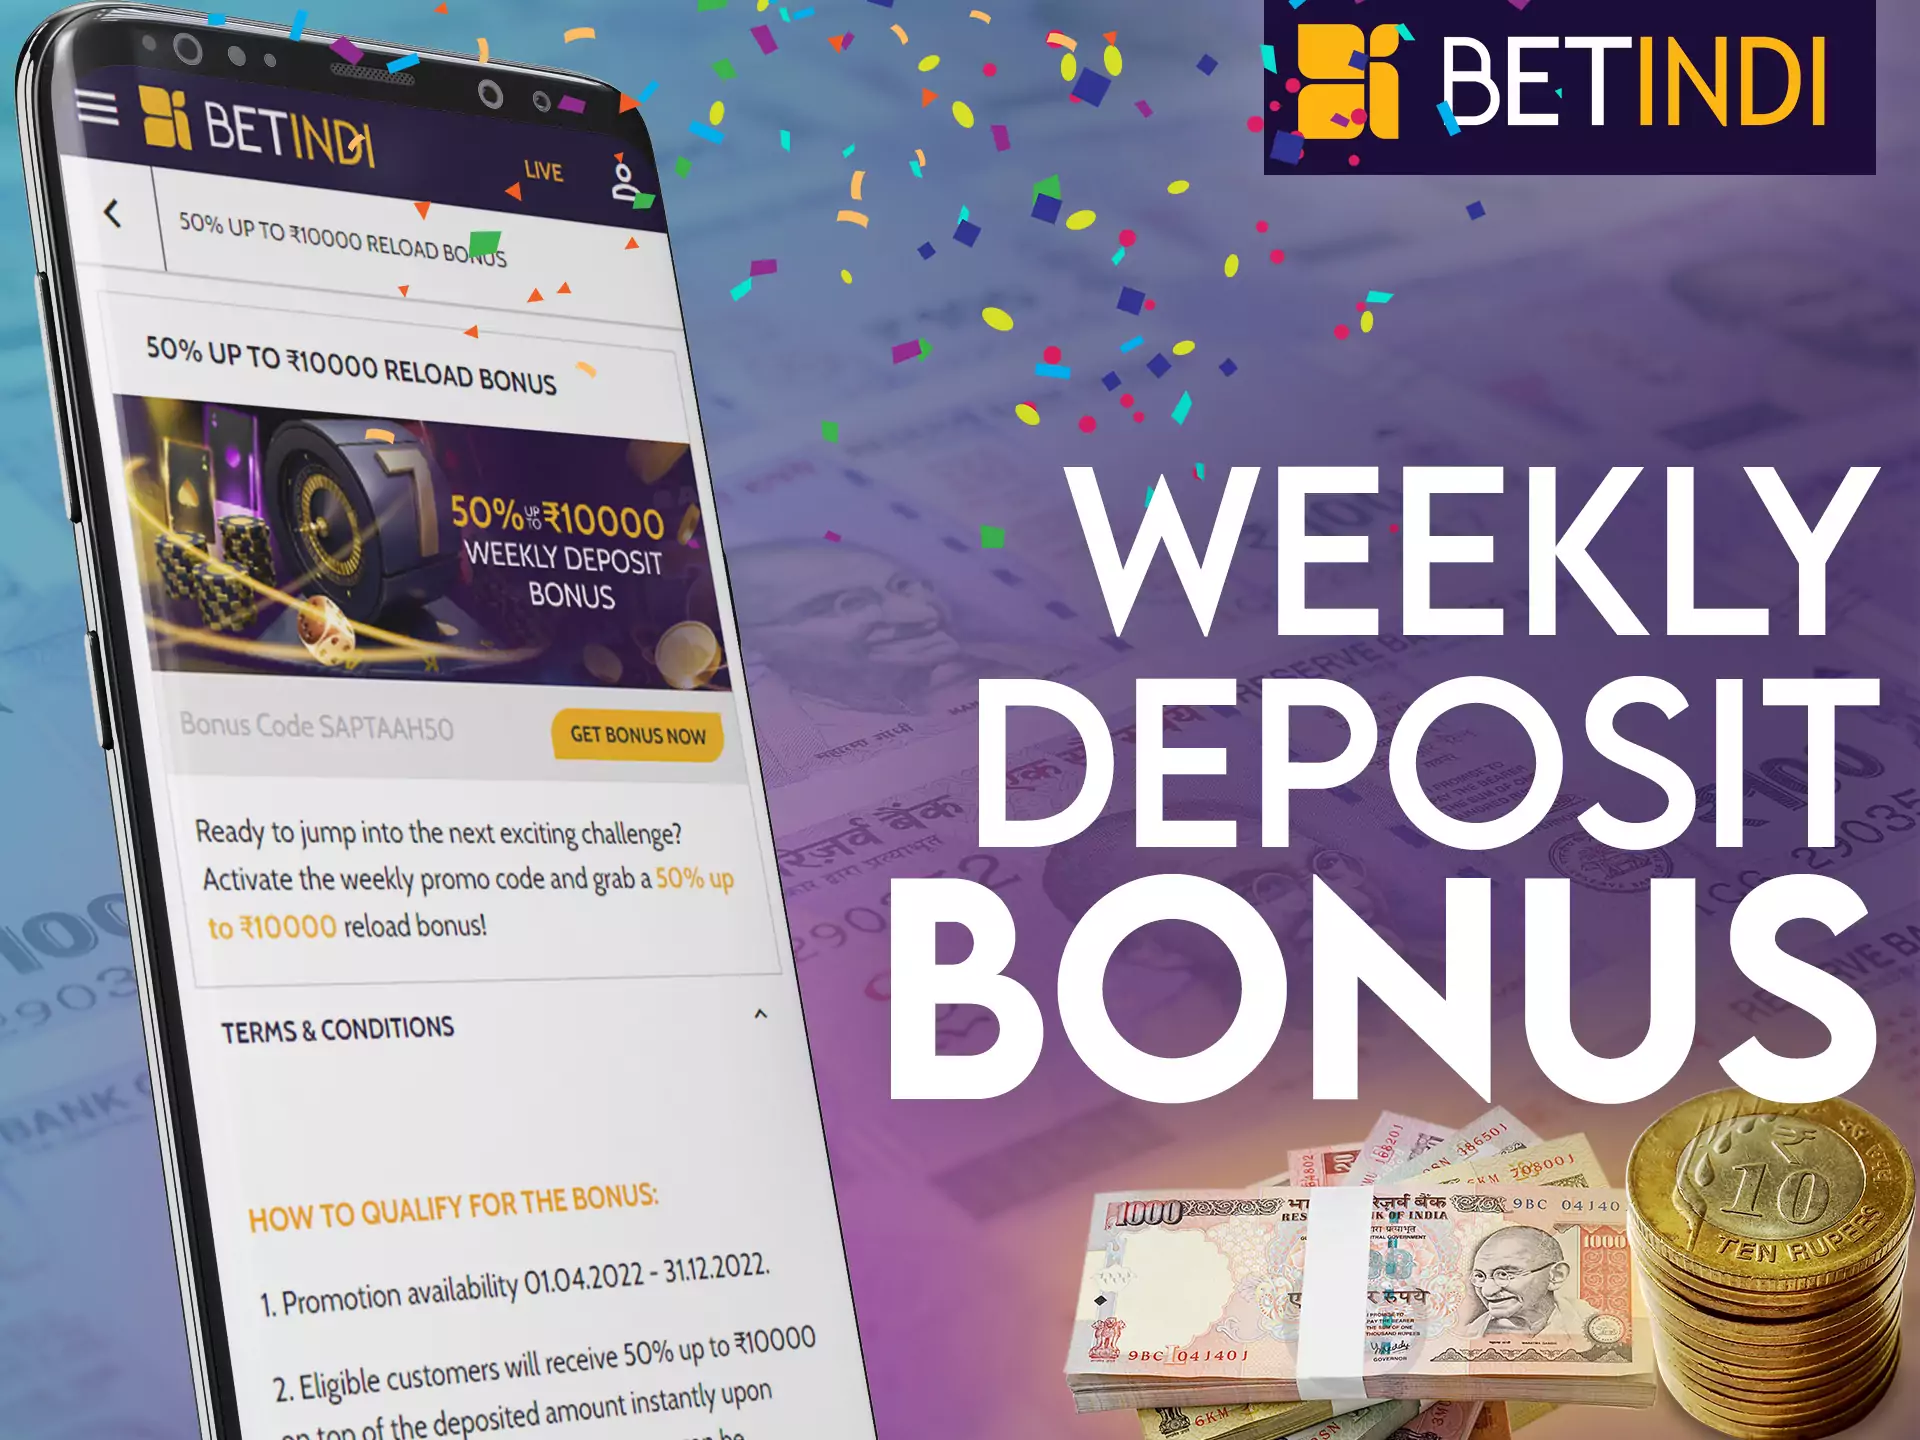 Behind can offer players to get a weekly deposit bonus.